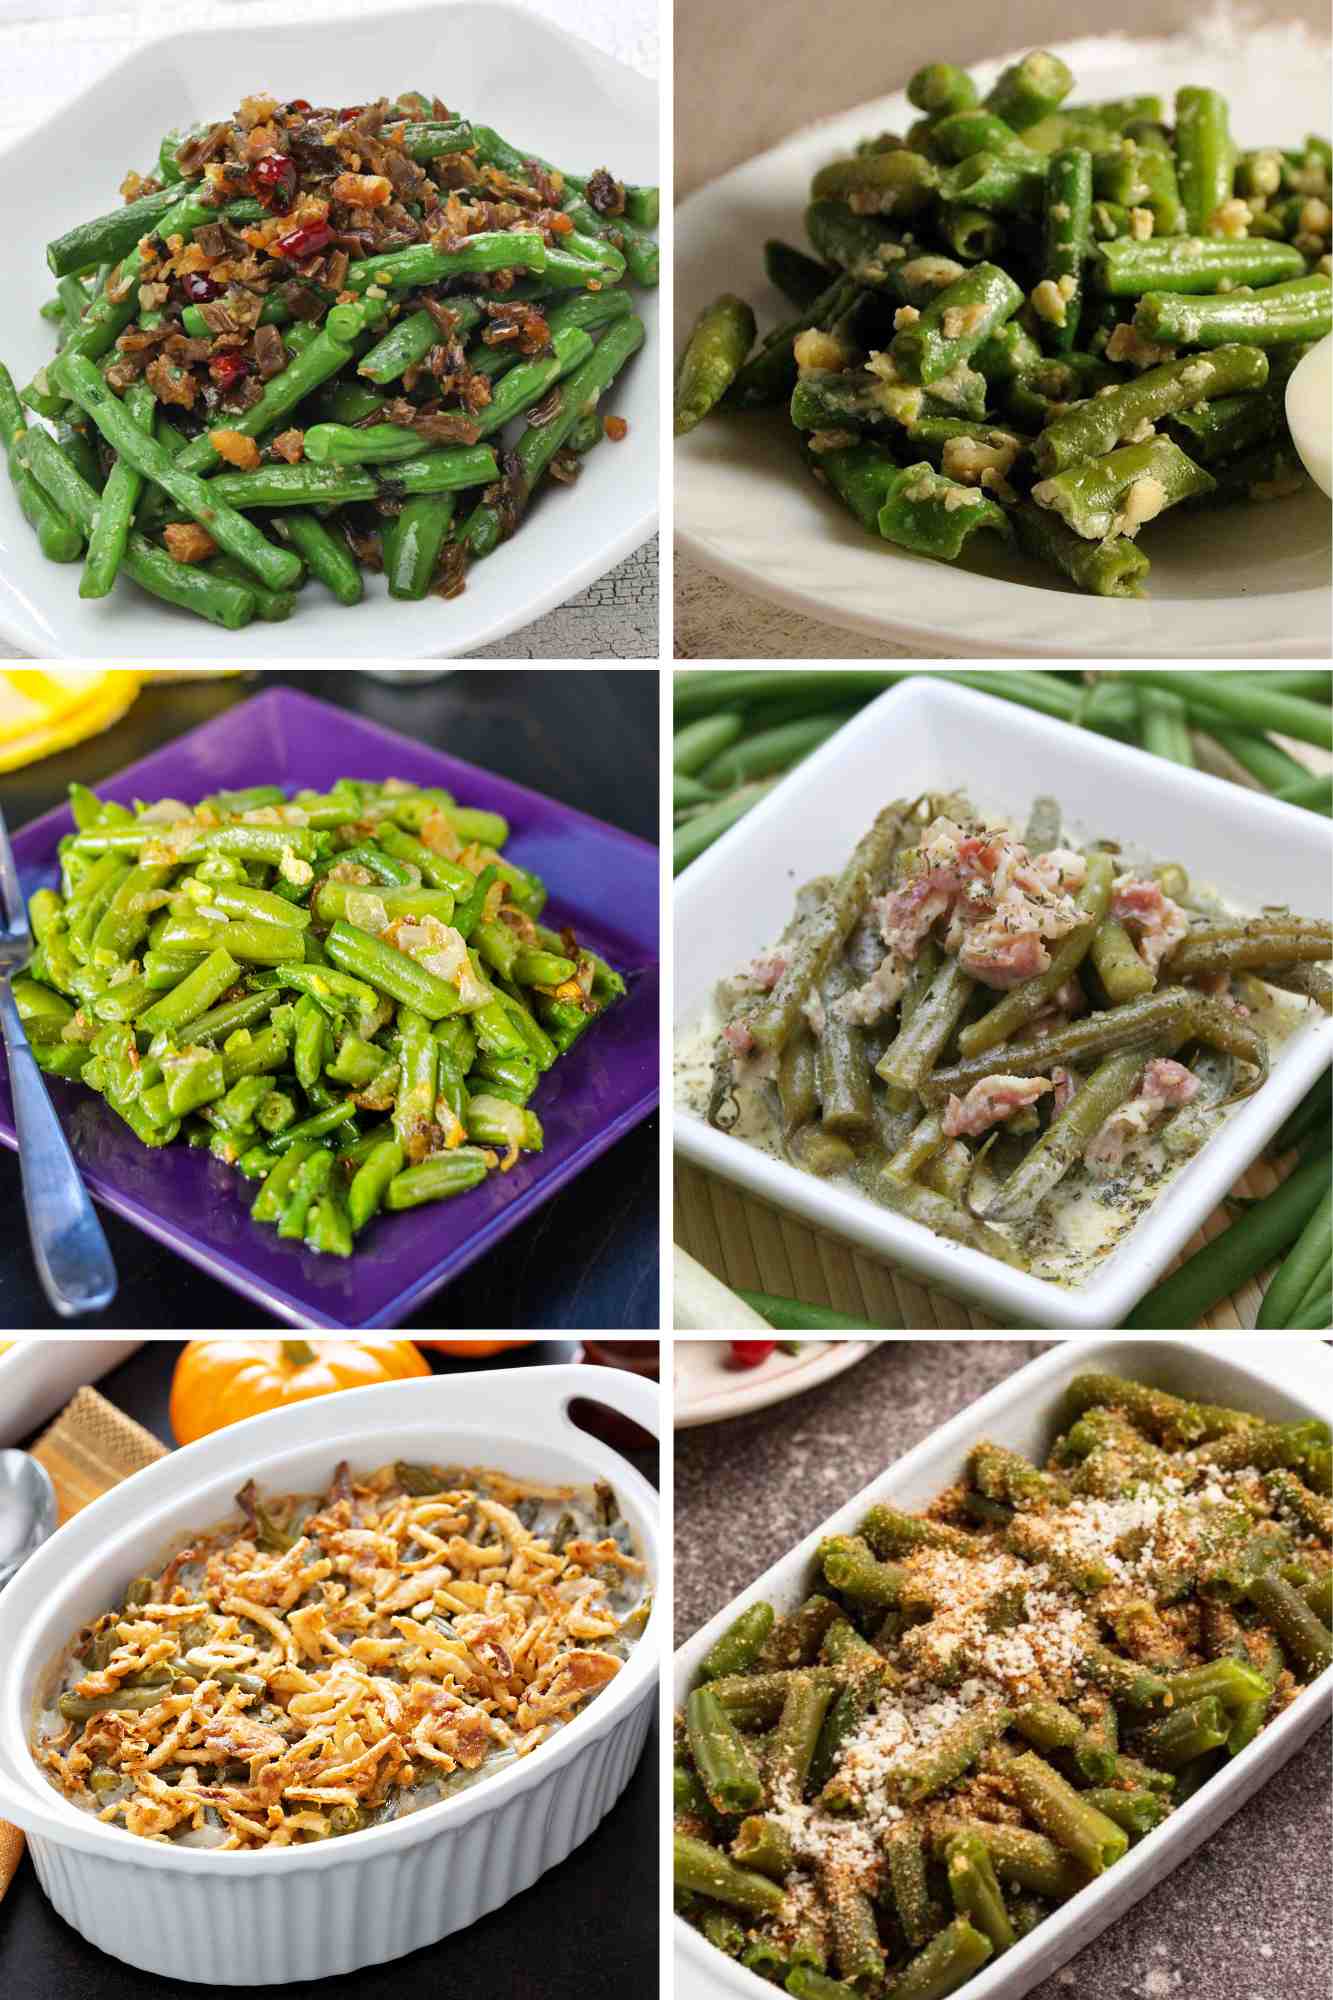 Canned Green Beans are a great way to ensure there’s always something nutritious in your pantry. Here are 11 quick and easy canned green bean recipes to make this popular canned veggie taste even better than the fresh ones! They are great pantry staples and will save you so much time in your kitchen.